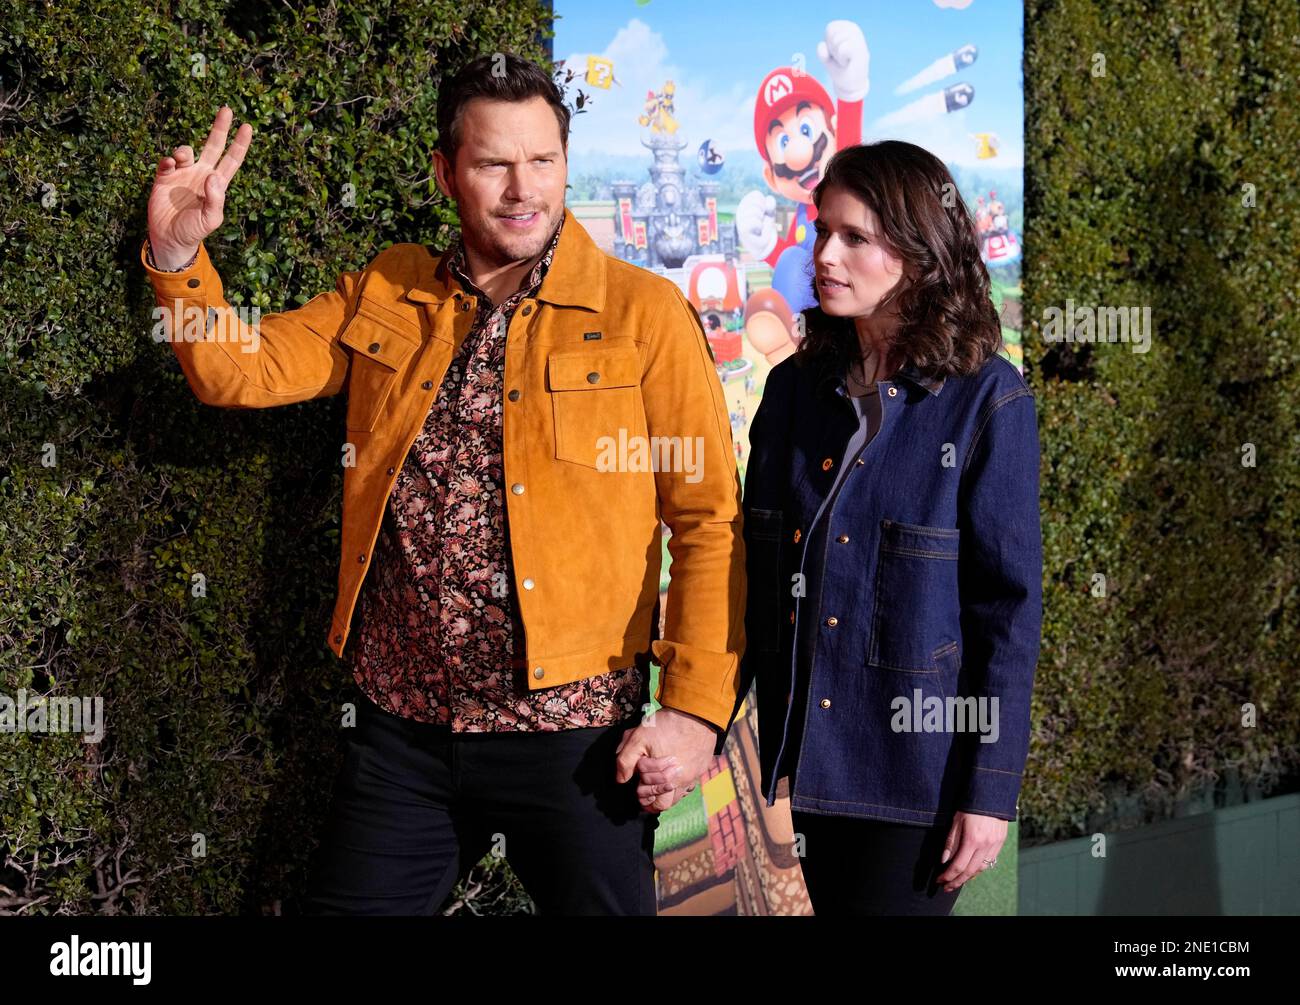 Chris Pratt and his wife Katherine Schwarzenegger pose together at the Super Nintendo World grand opening press event, Wednesday, Feb. 15, 2023, at Universal Studios Hollywood in Universal City, Calif. (AP Photo/Chris Pizzello) Banque D'Images